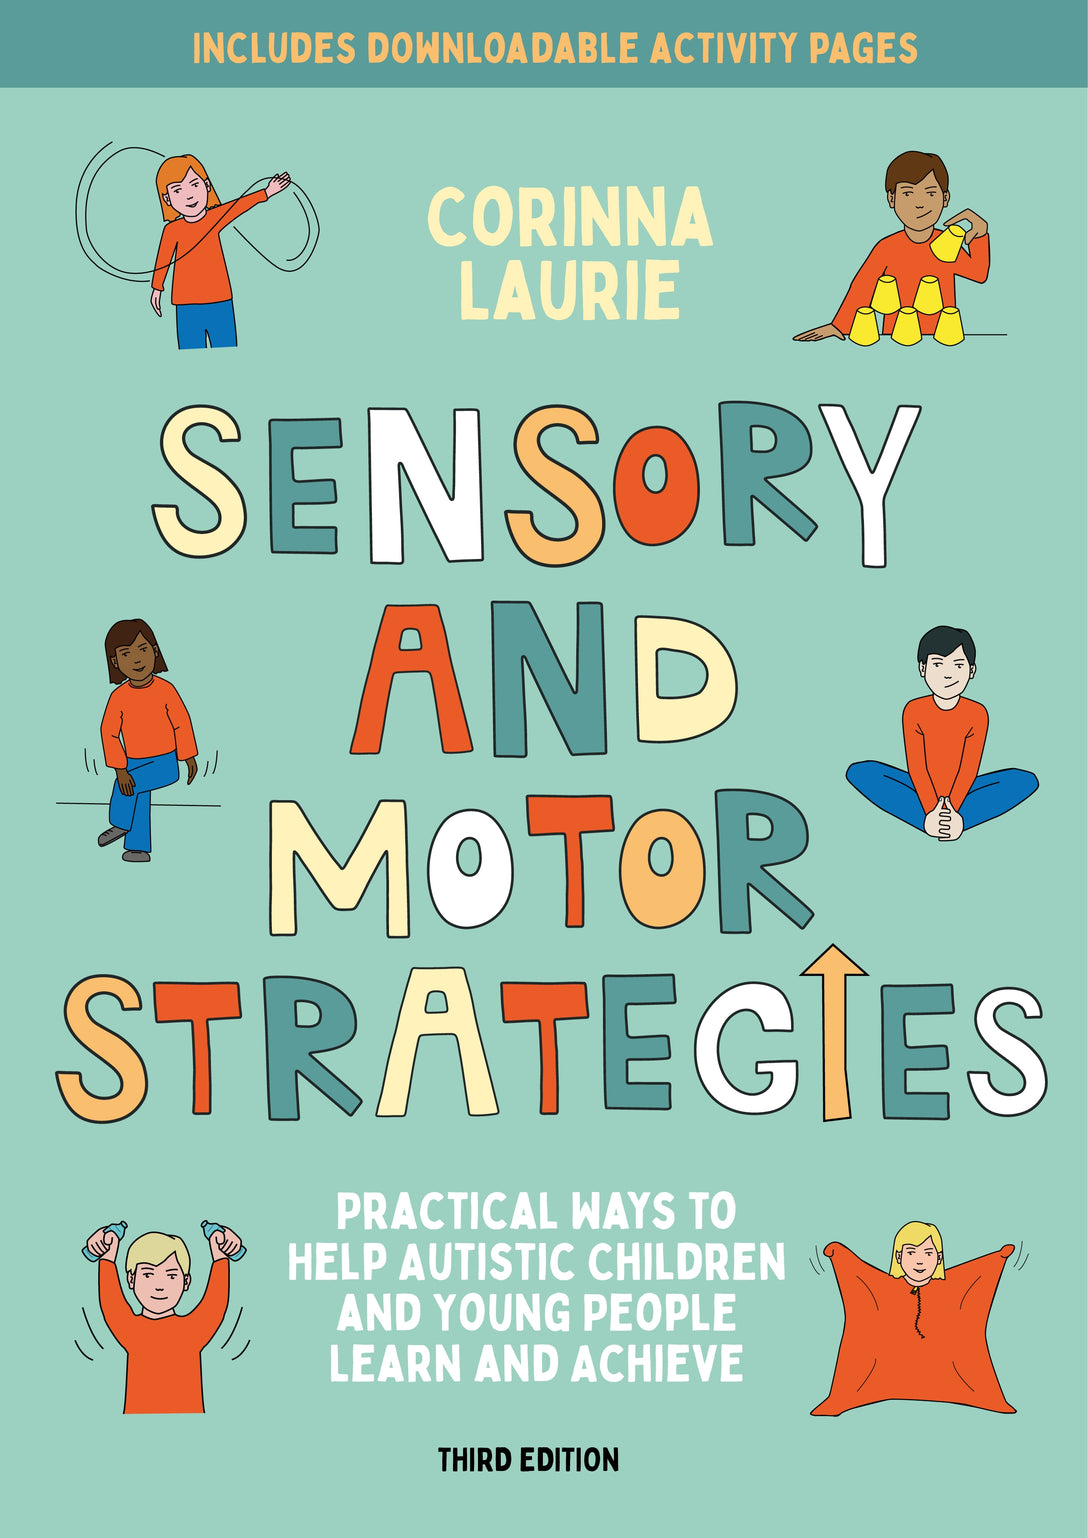 Sensory and Motor Strategies (3rd edition) by Corinna Laurie, Kirsteen Wright